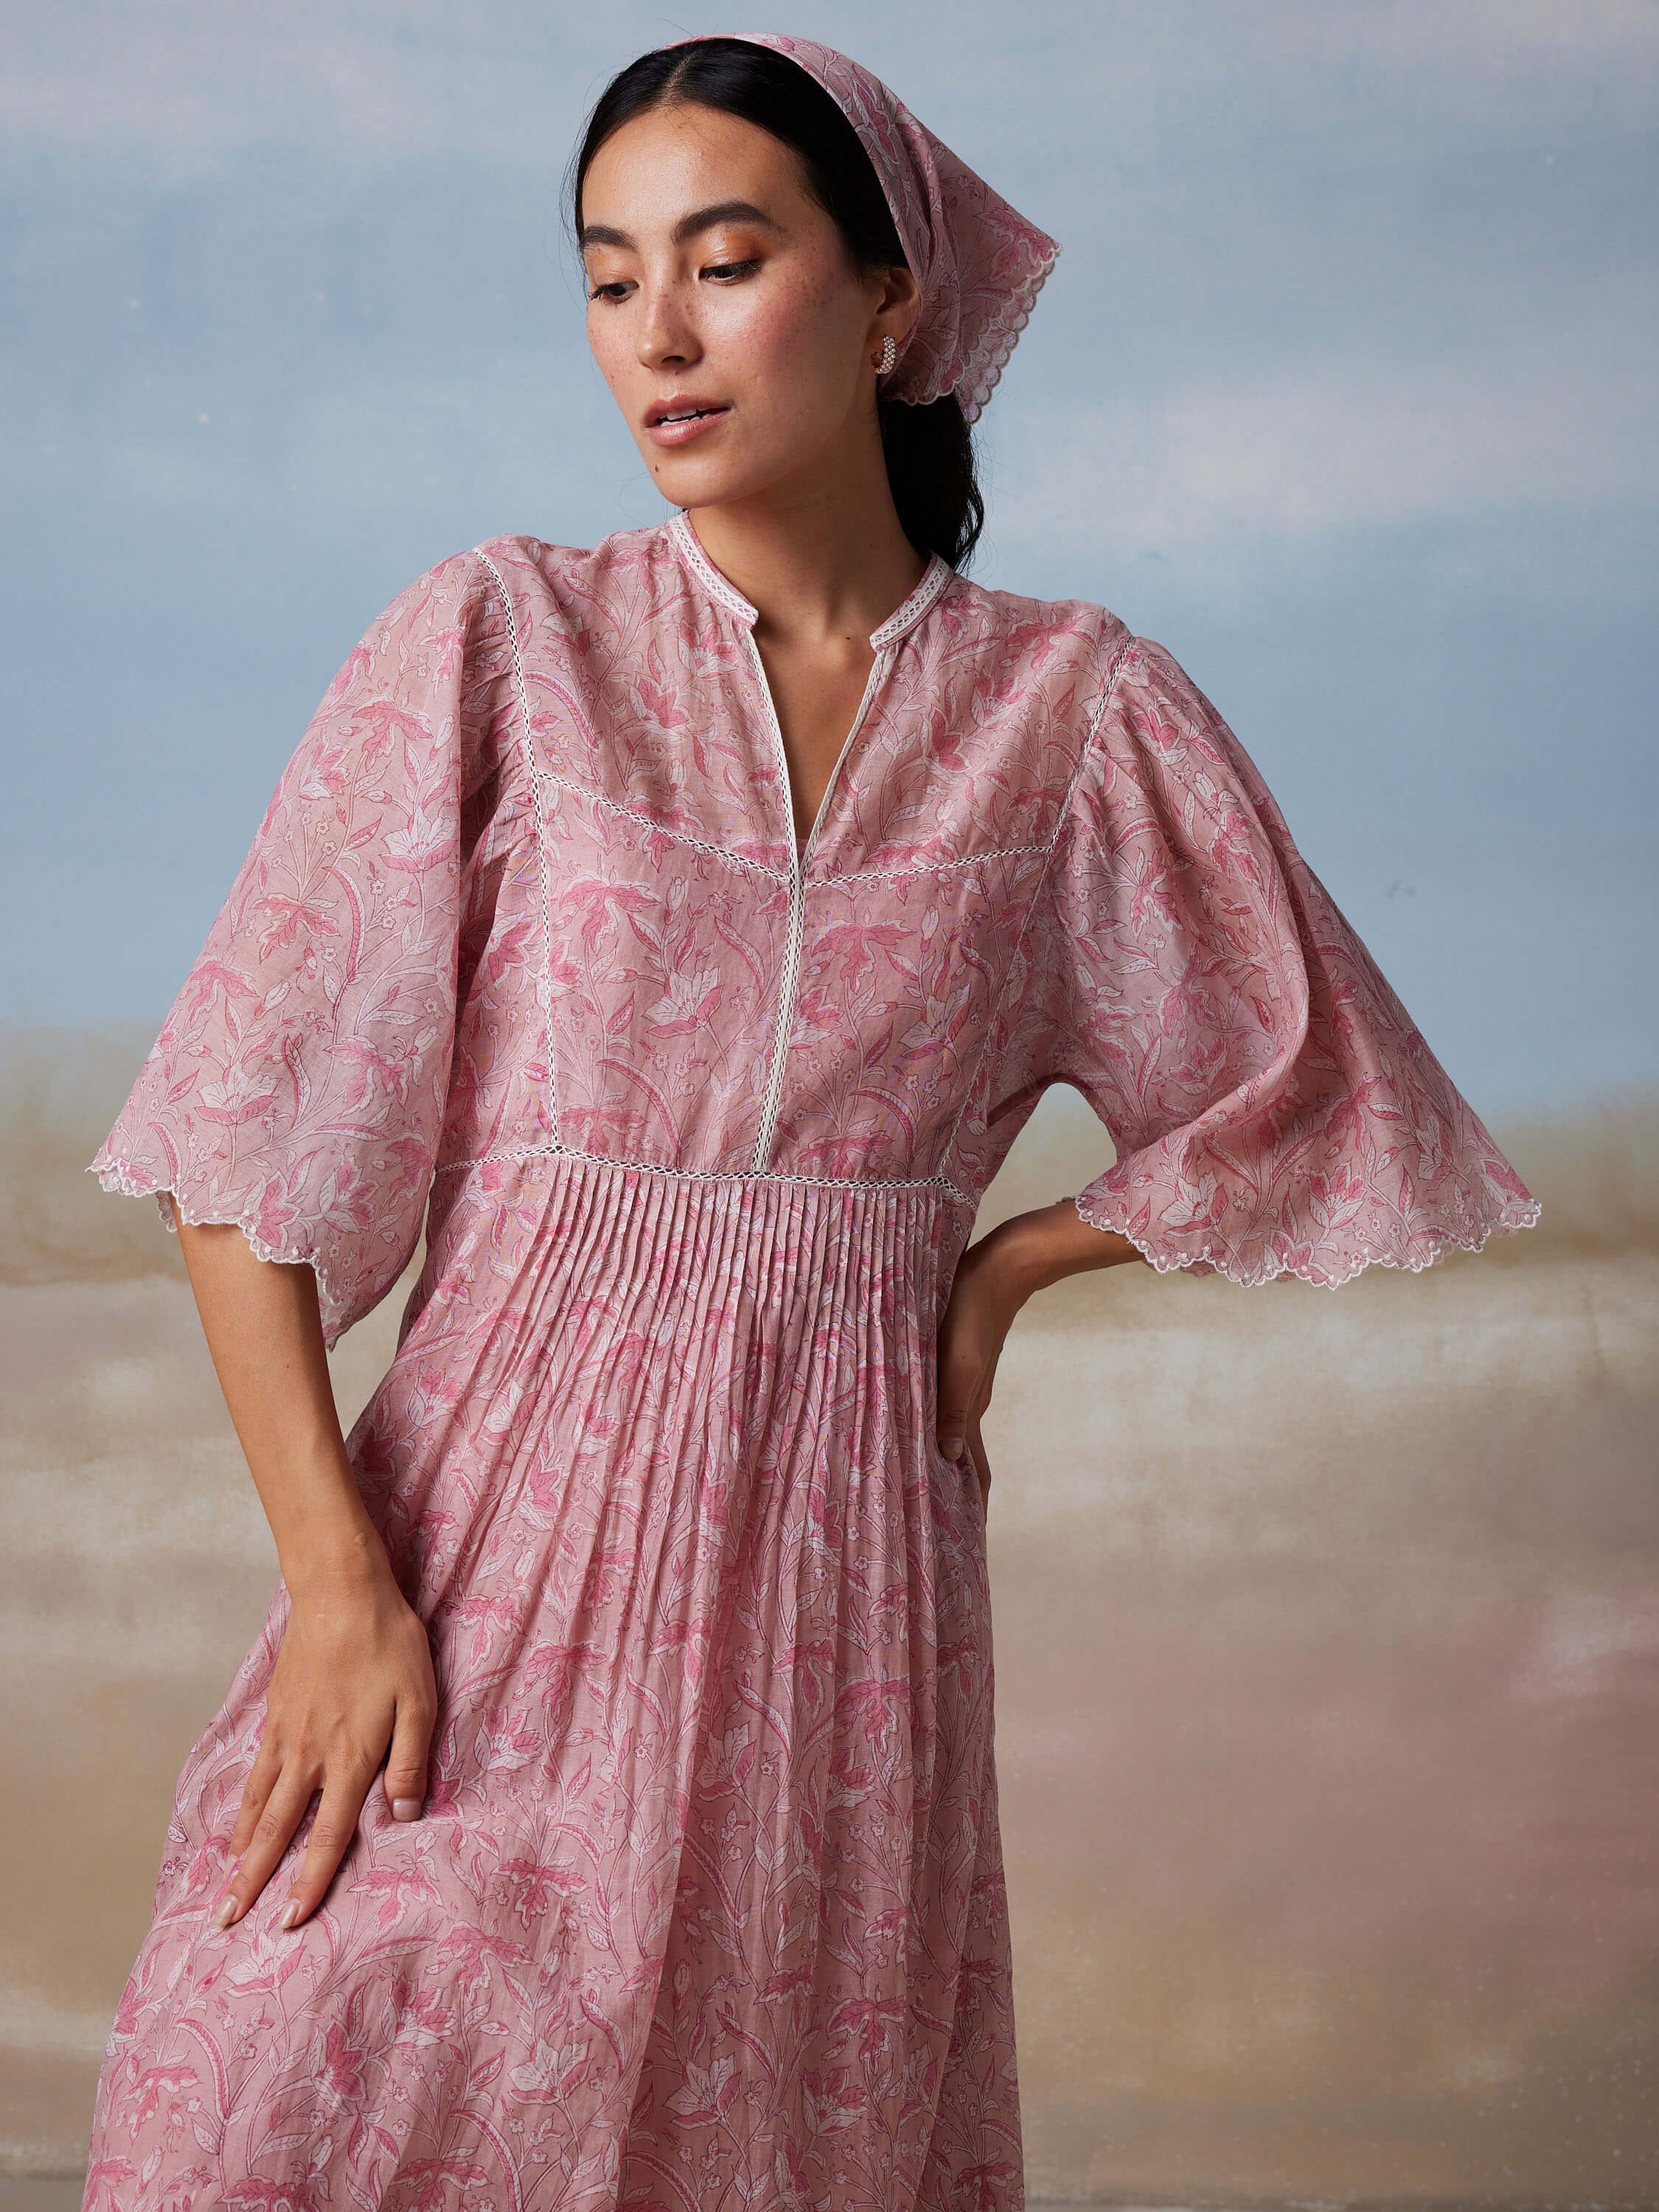 Woman in elegant pink floral dress and matching headscarf against pastel background.